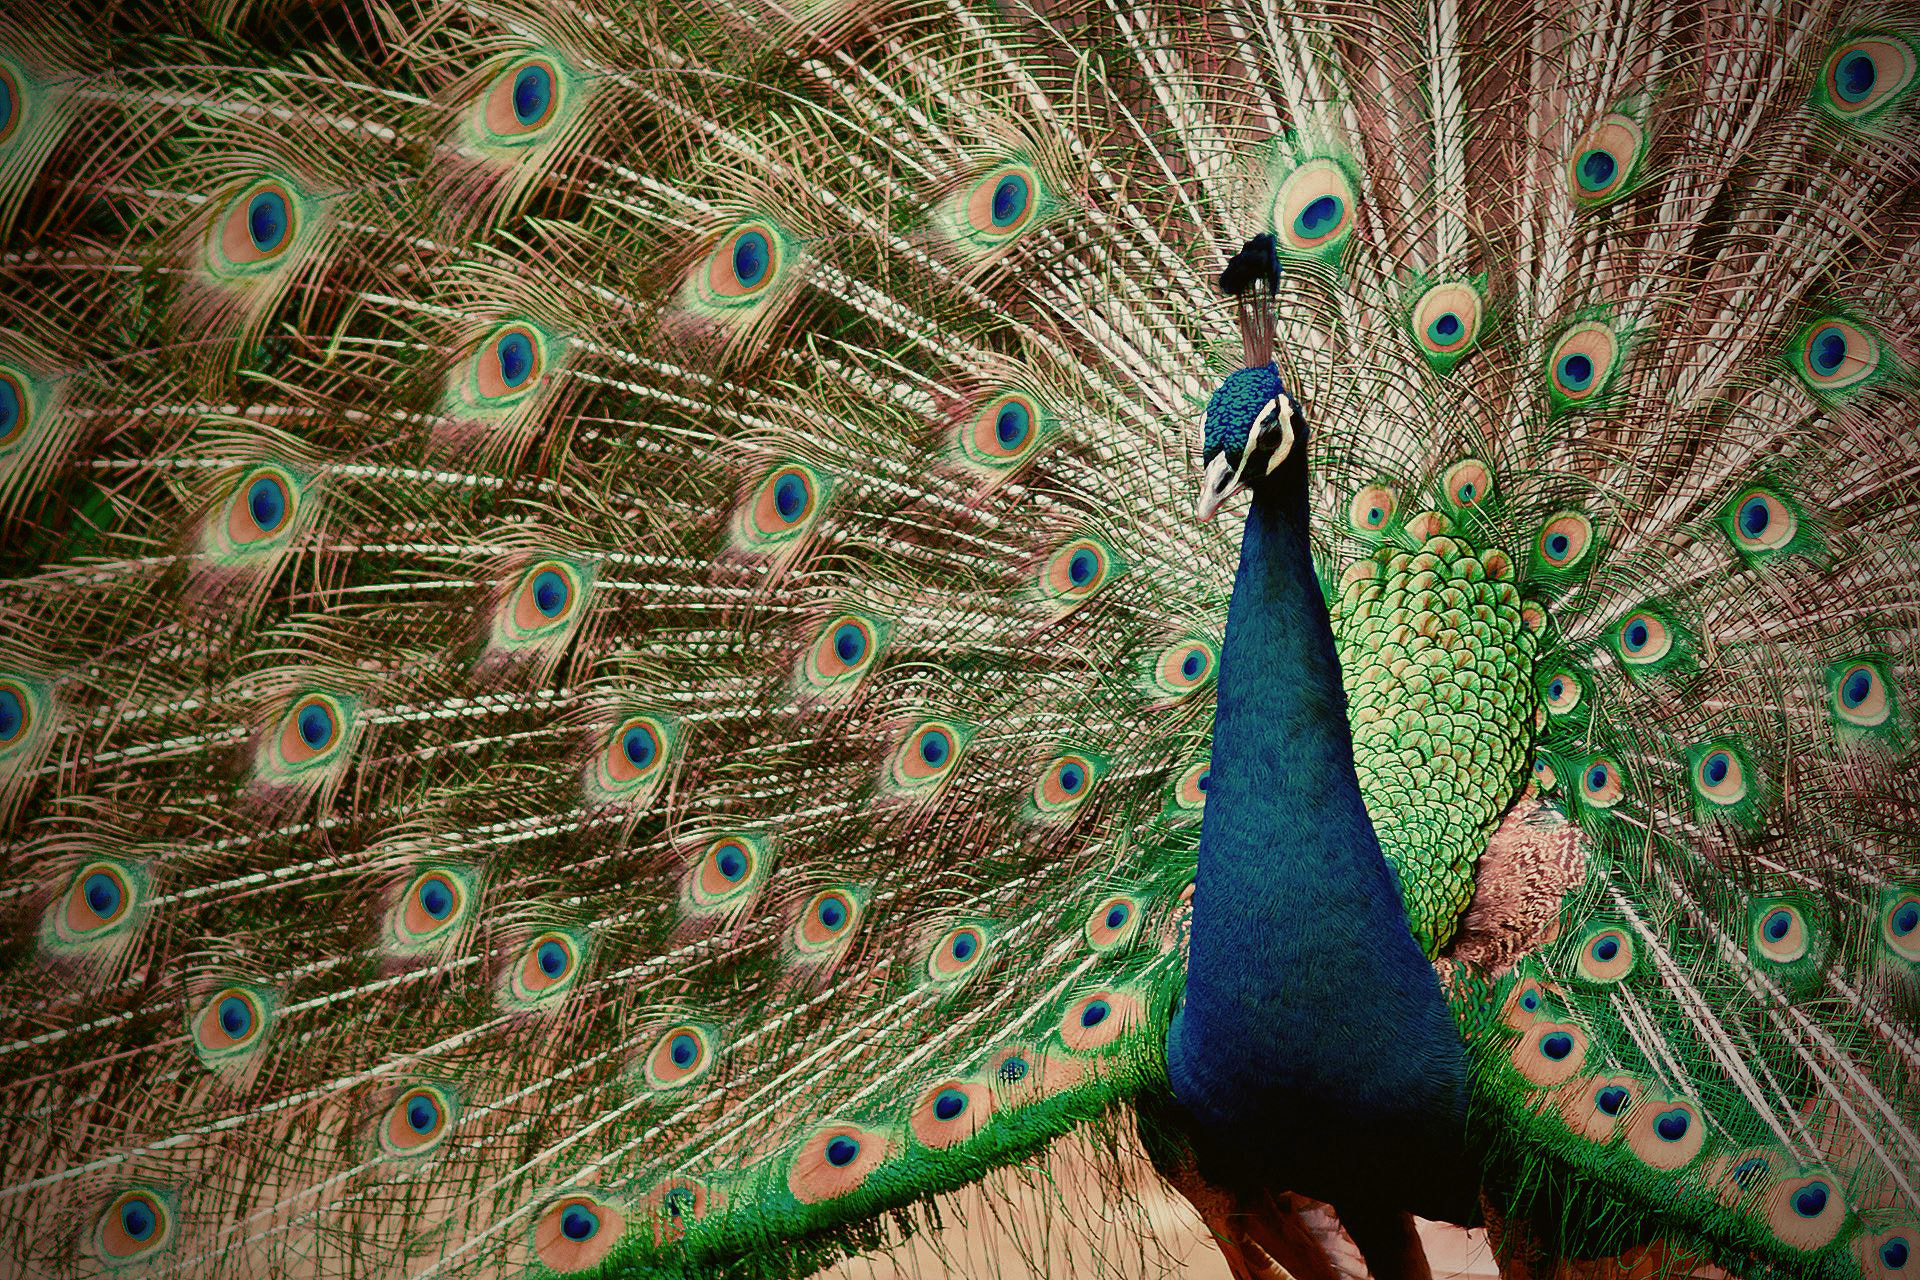 Sony SLT-A77 sample photo. A peacock in his pride ii photography